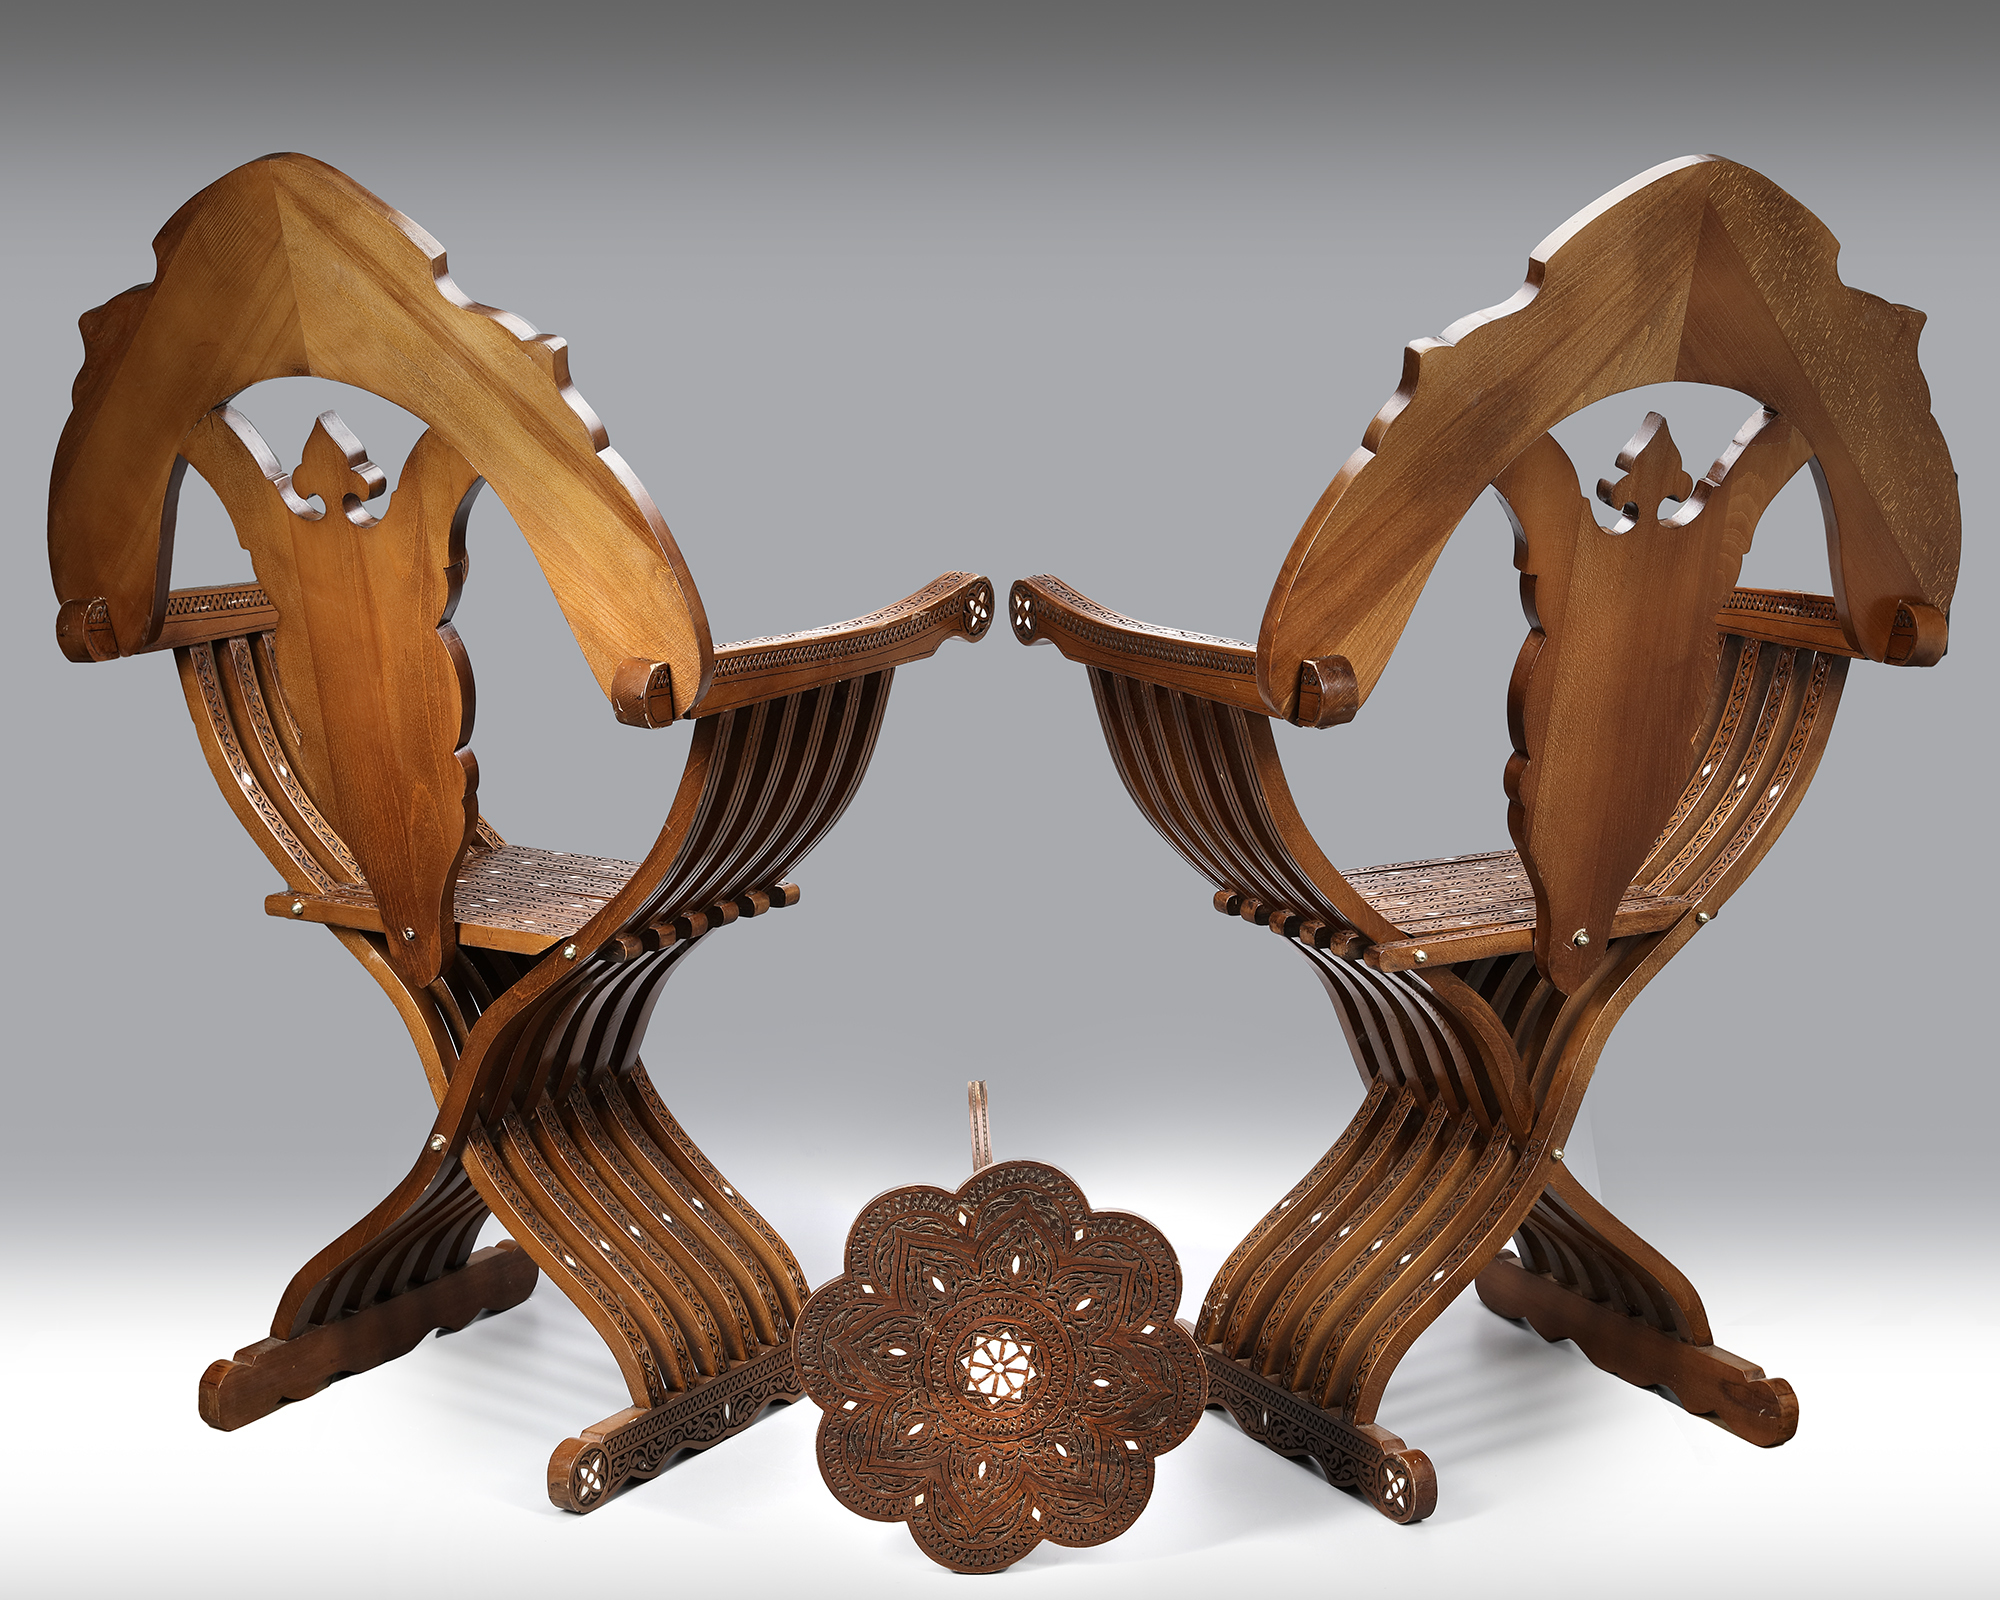 A PAIR OF SYRIAN MOTHER OF PEARL INLAID FOLDING CHAIRS AND A TABLE, LATE 19TH CENTURY - Image 3 of 3